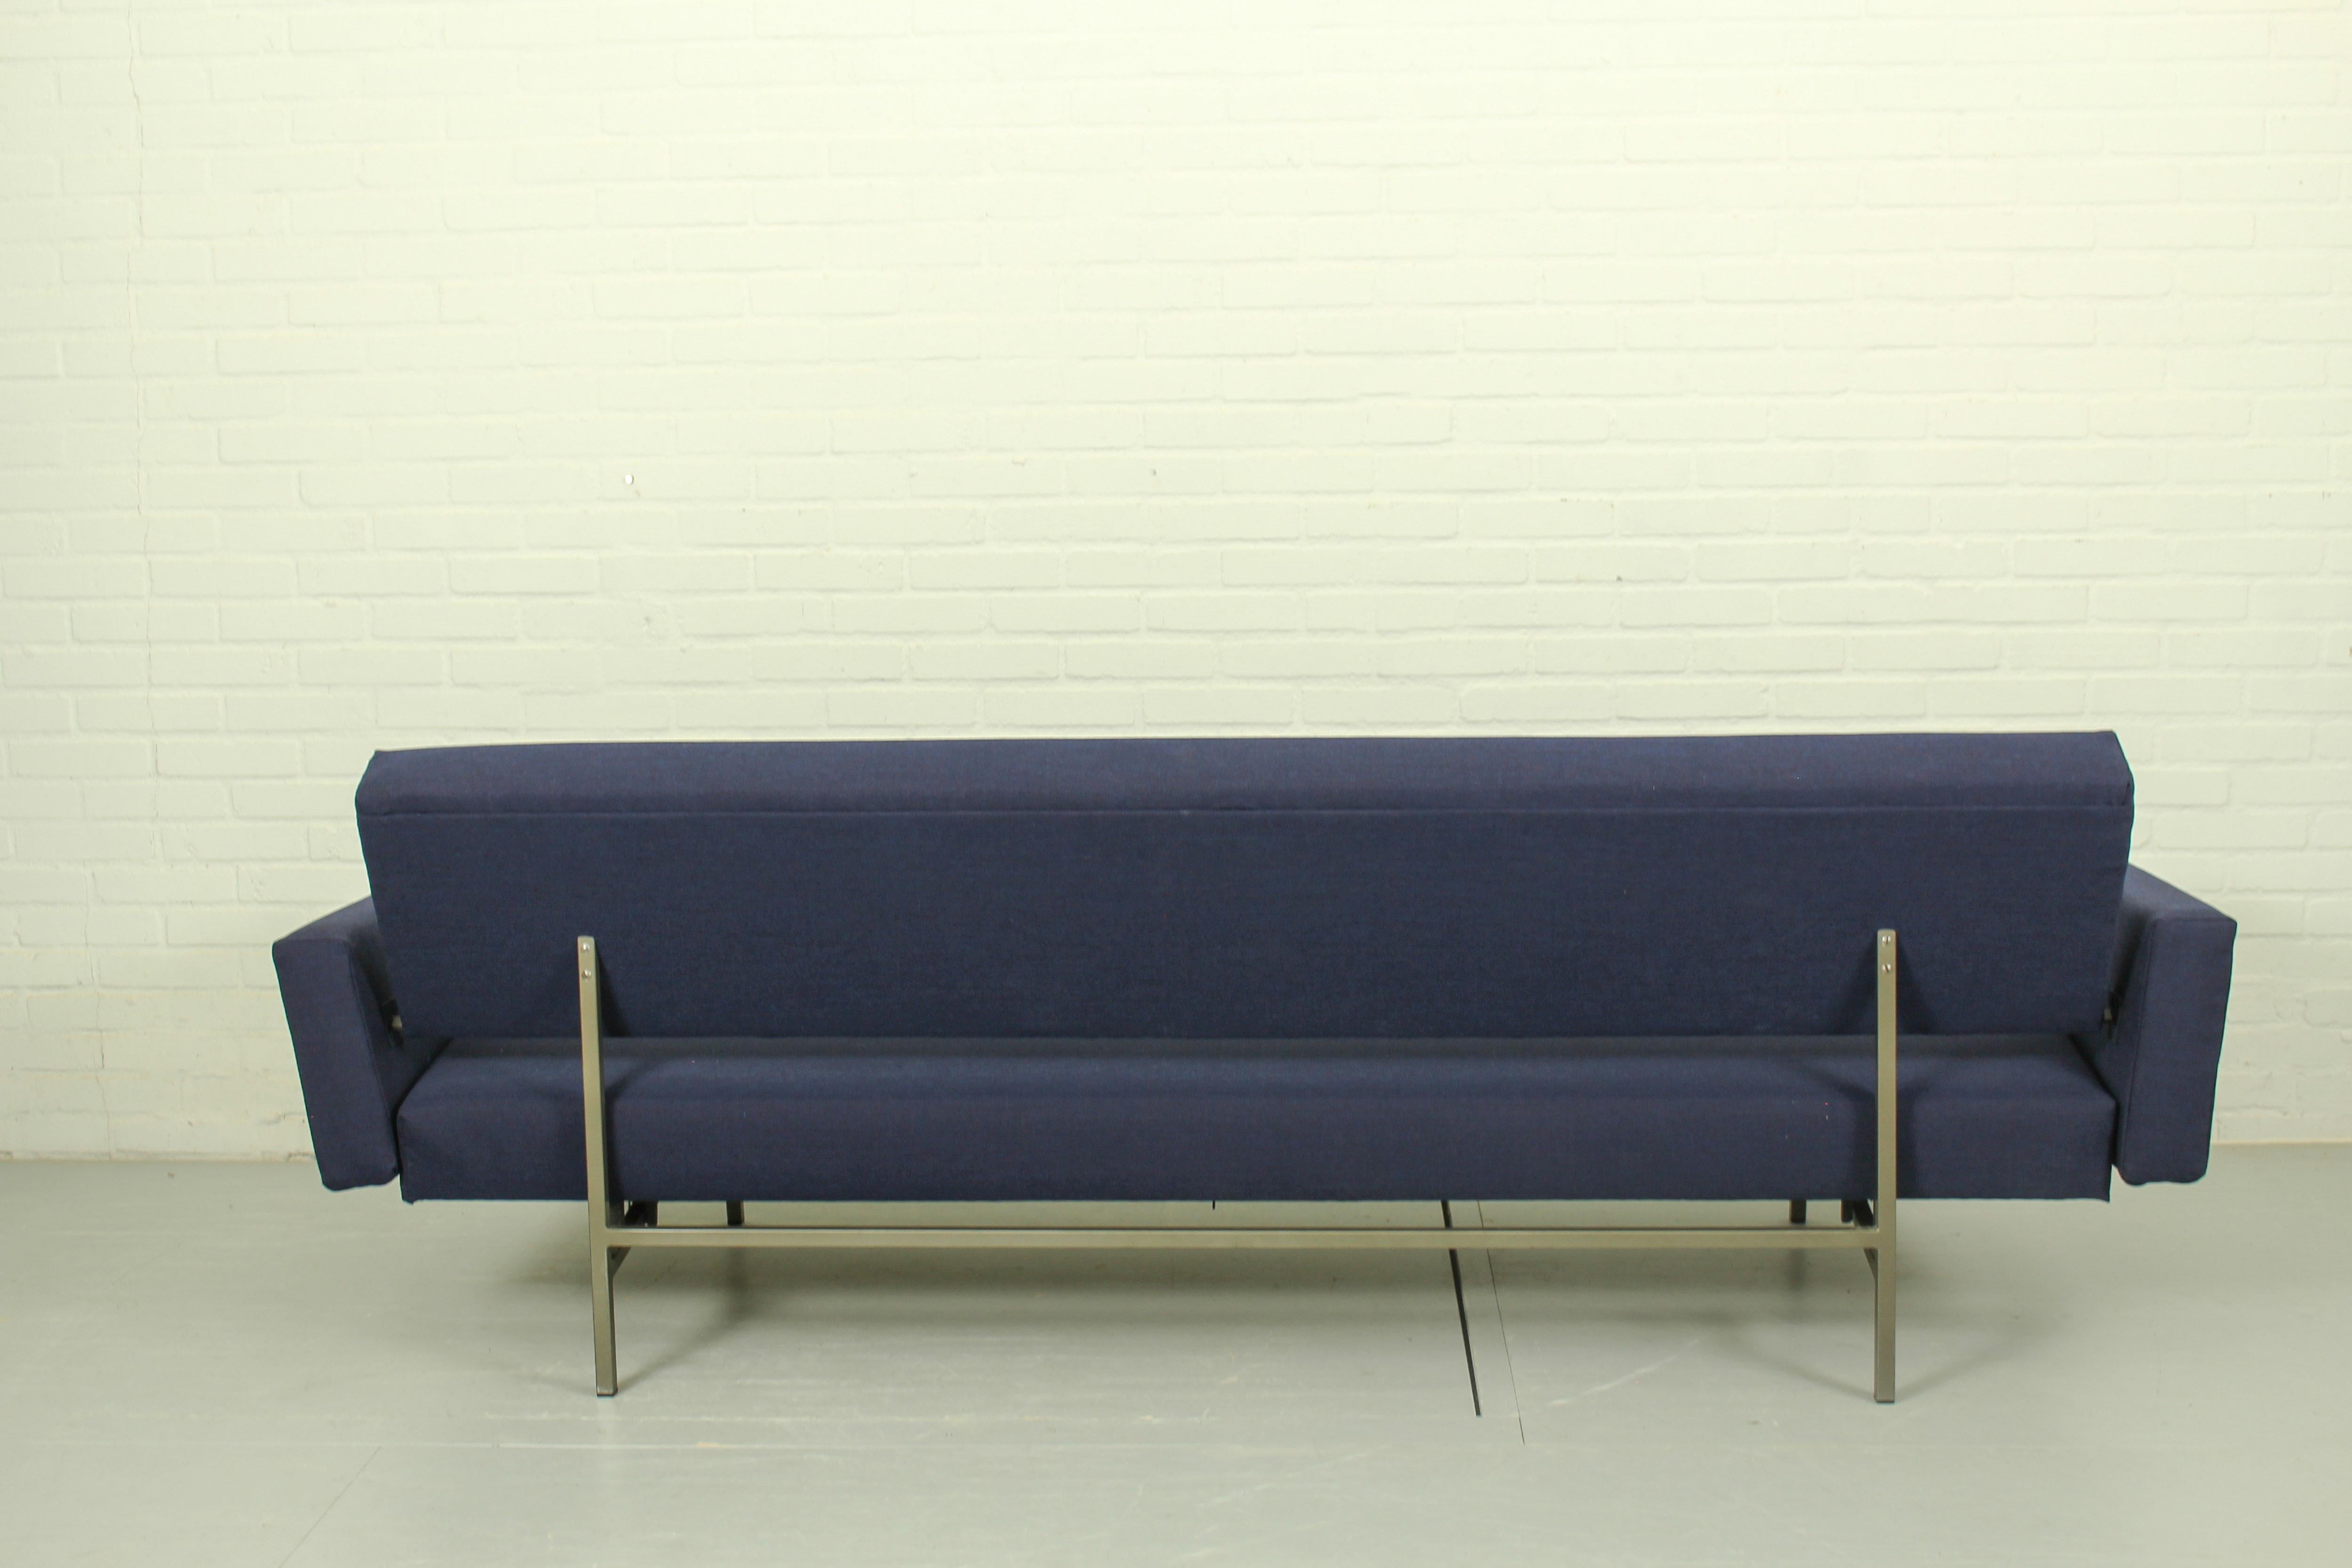 Sofa/ Daybed by Rob Parry for Gelderland, Netherlands, 1950s For Sale 2